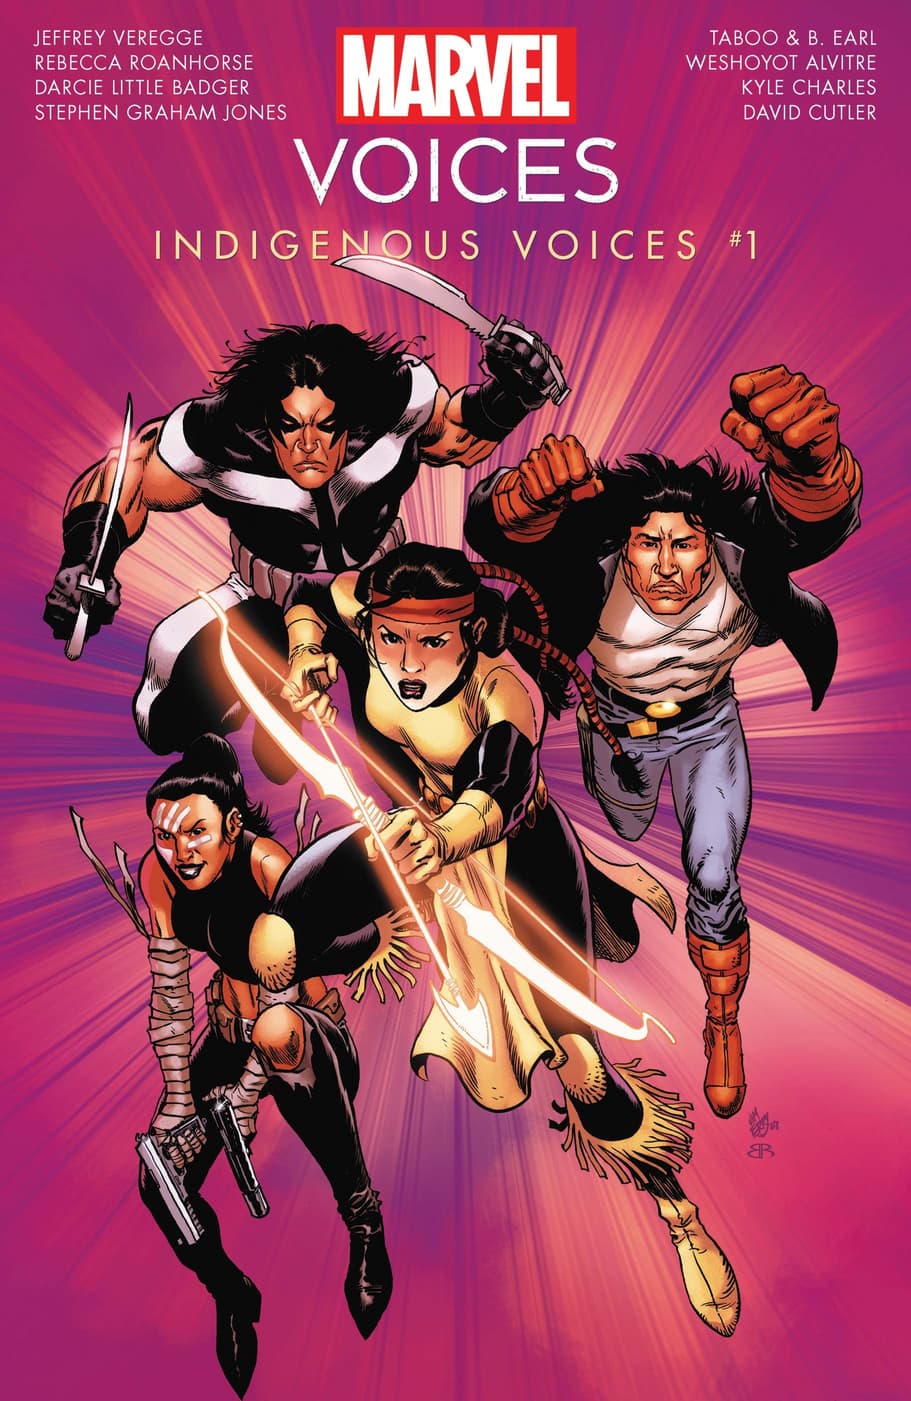 Cover to MARVEL’S VOICES: INDIGENOUS VOICES #1.